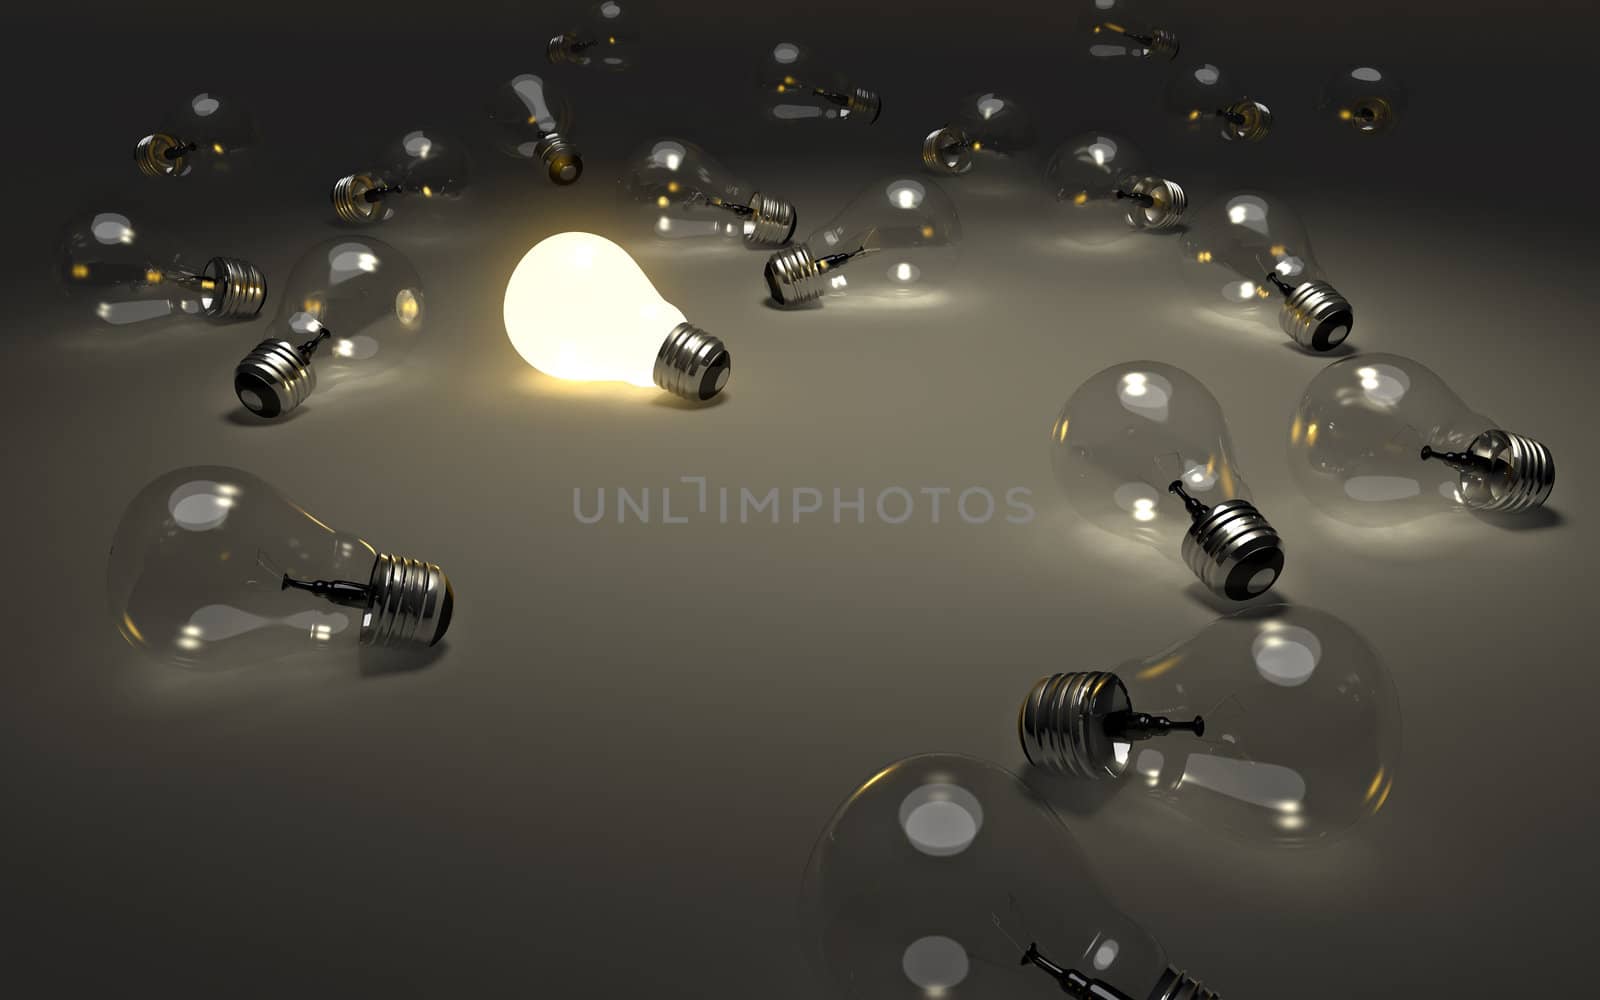 Some light bulbs only one is glowing. Concept image for having an idea.